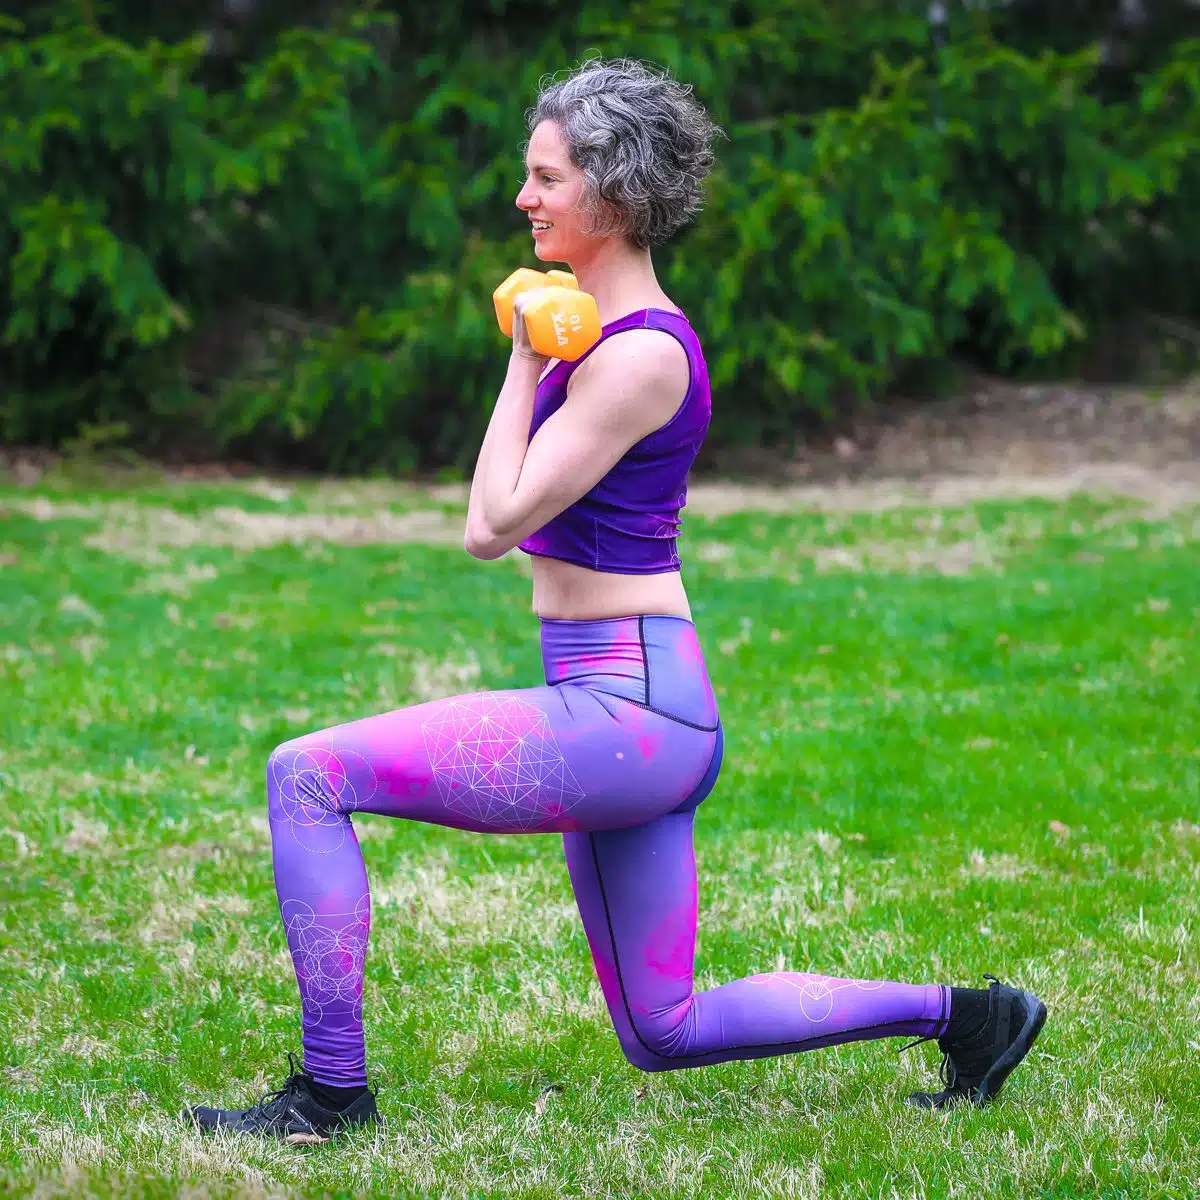 21 Day fix review: Lunges